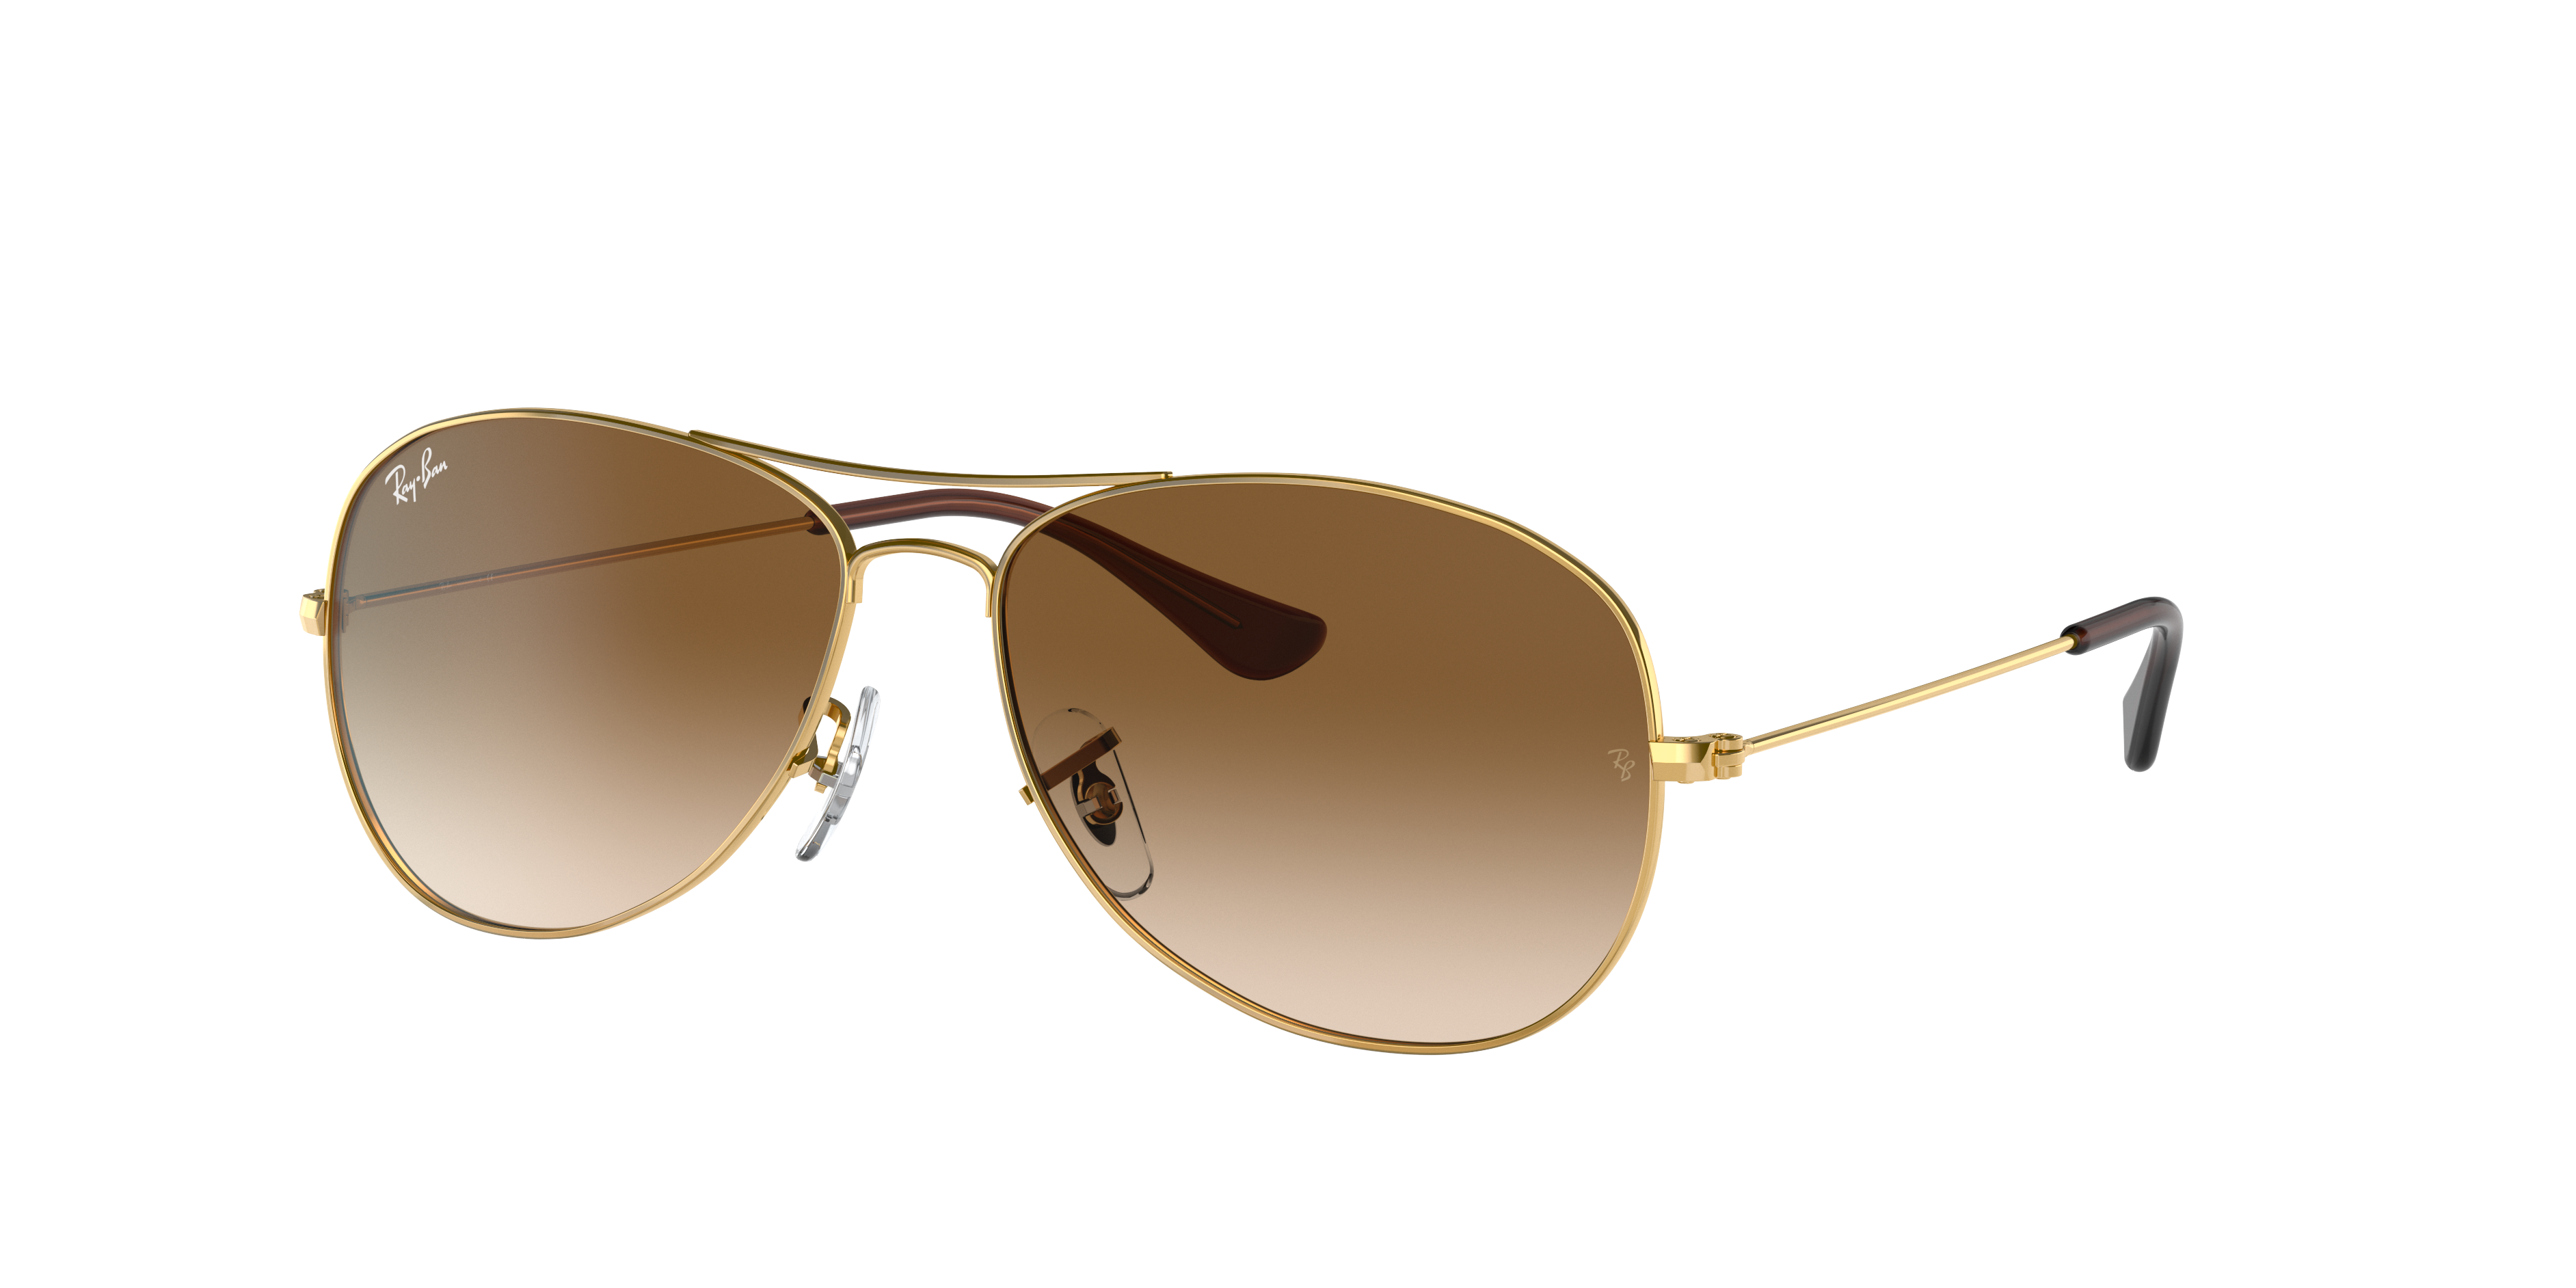 Cockpit Sunglasses in Gold and Light Brown | Ray-Ban®